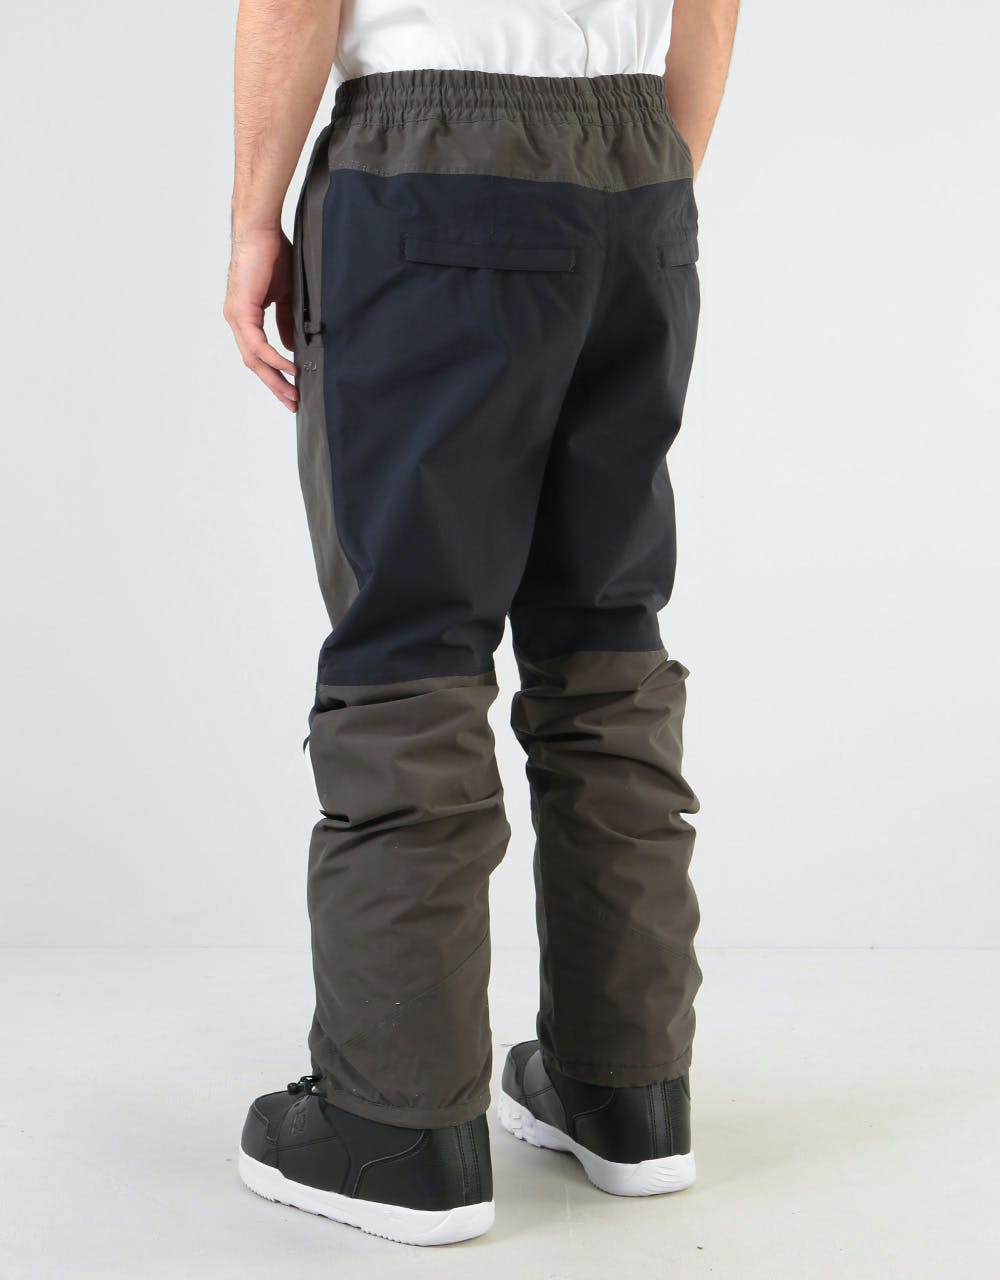 ThirtyTwo Sweeper Pant 2020 Snowboard Pants - Graphite